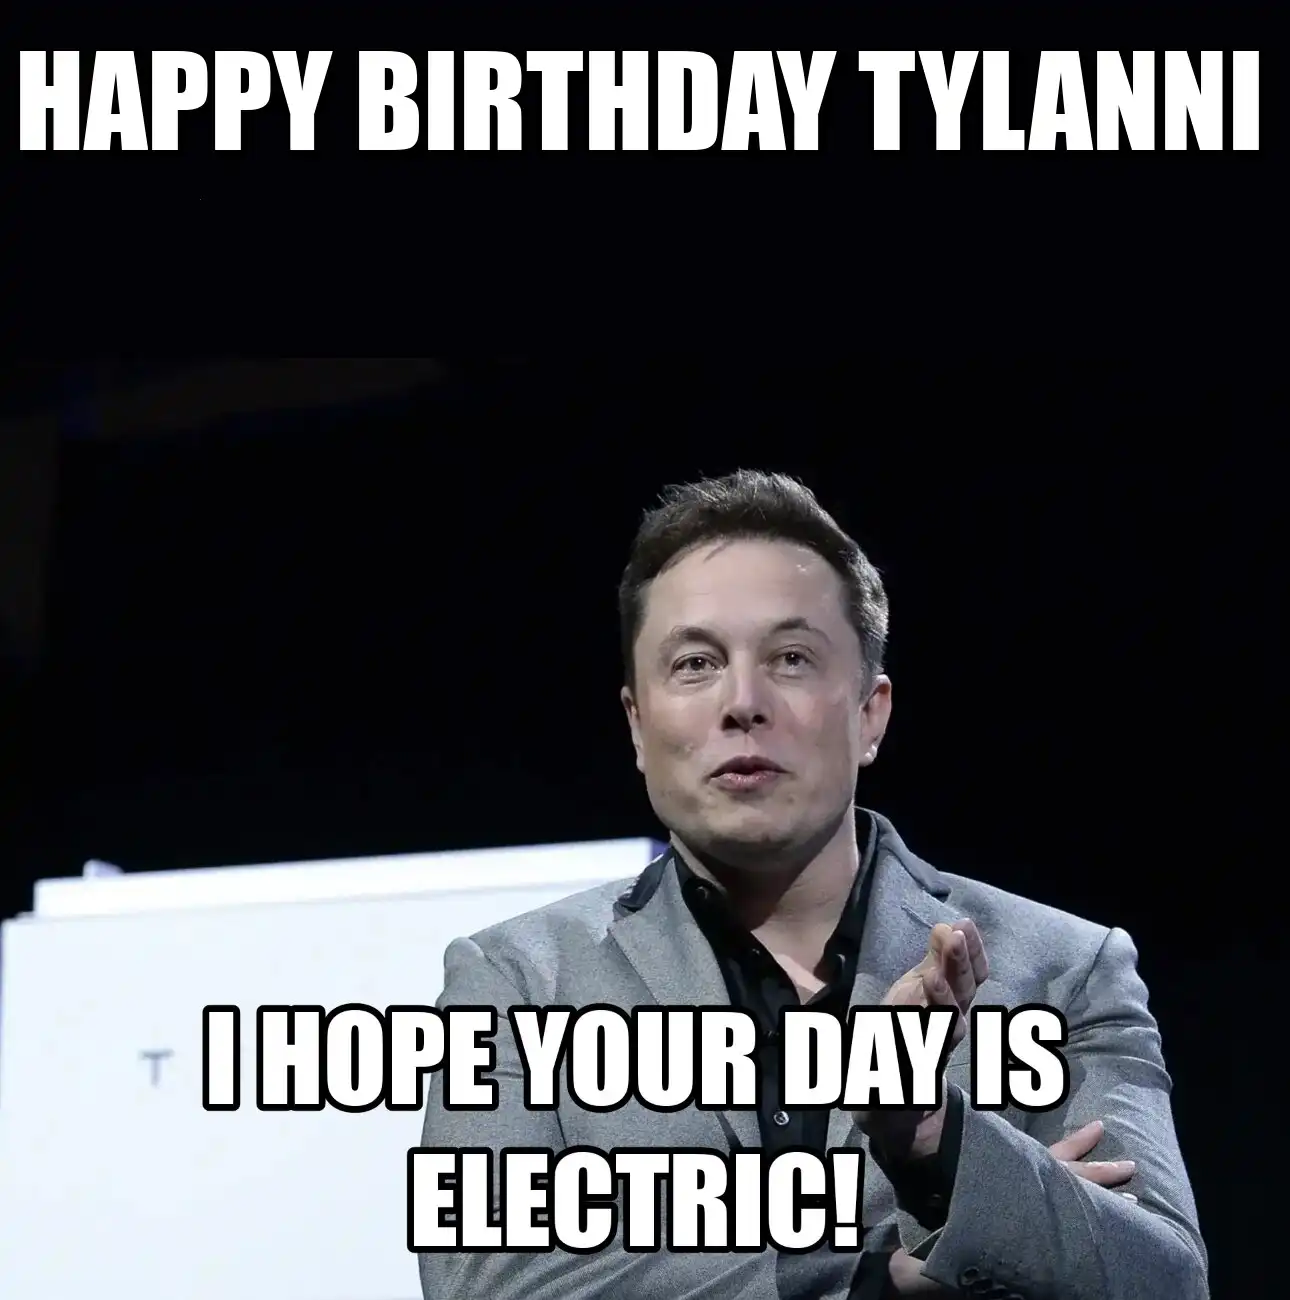 Happy Birthday Tylanni I Hope Your Day Is Electric Meme